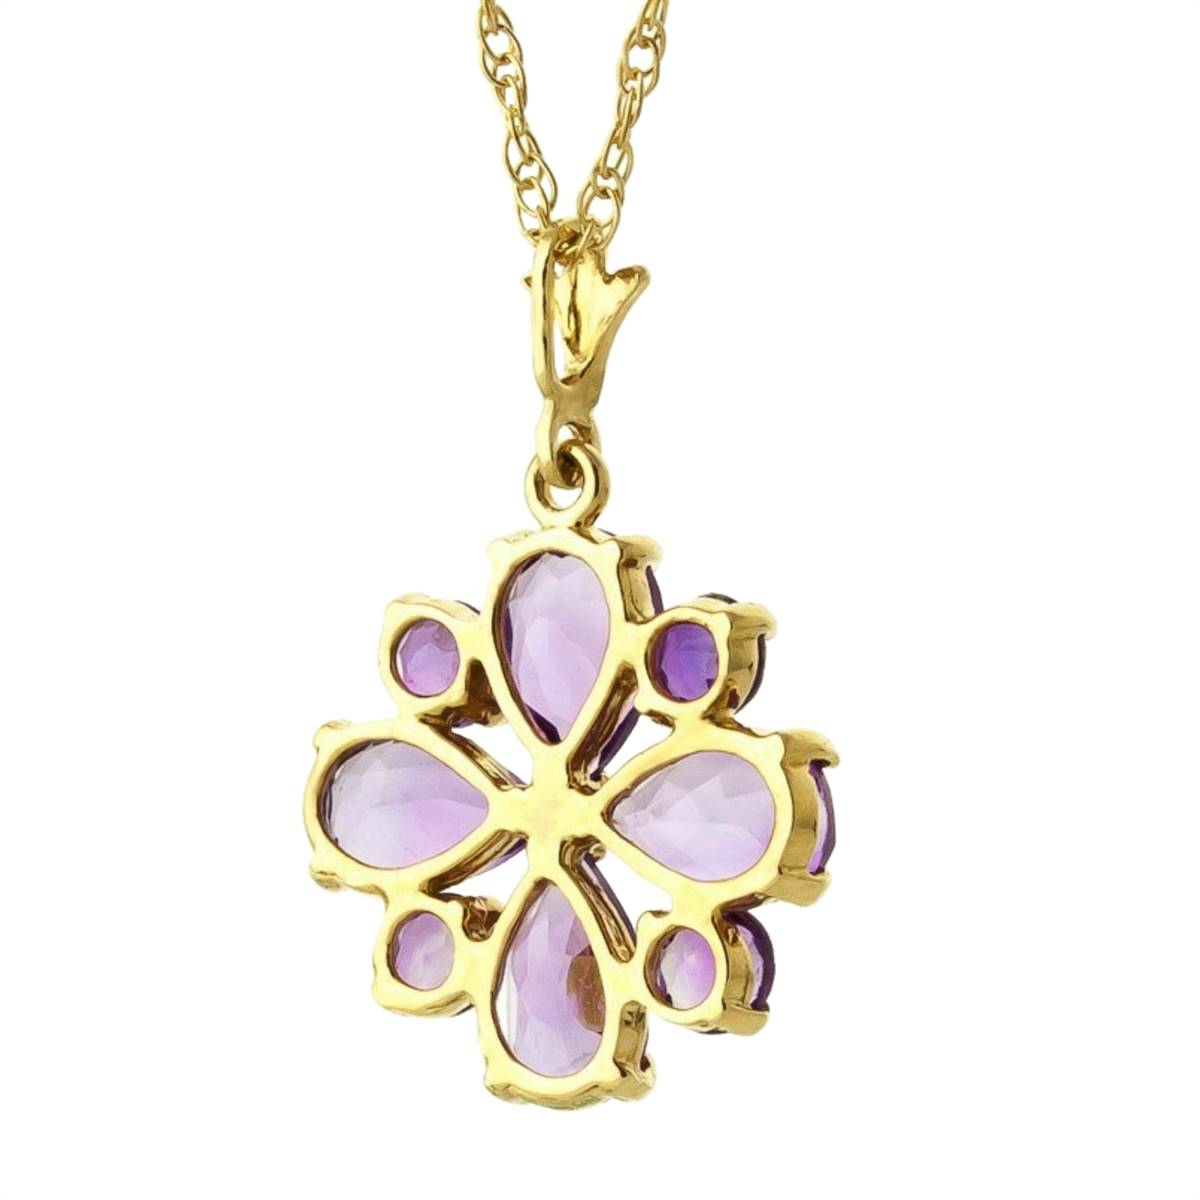 2.43 Carat 14K Solid Yellow Gold Testimony Of Love Amethyst Necklace